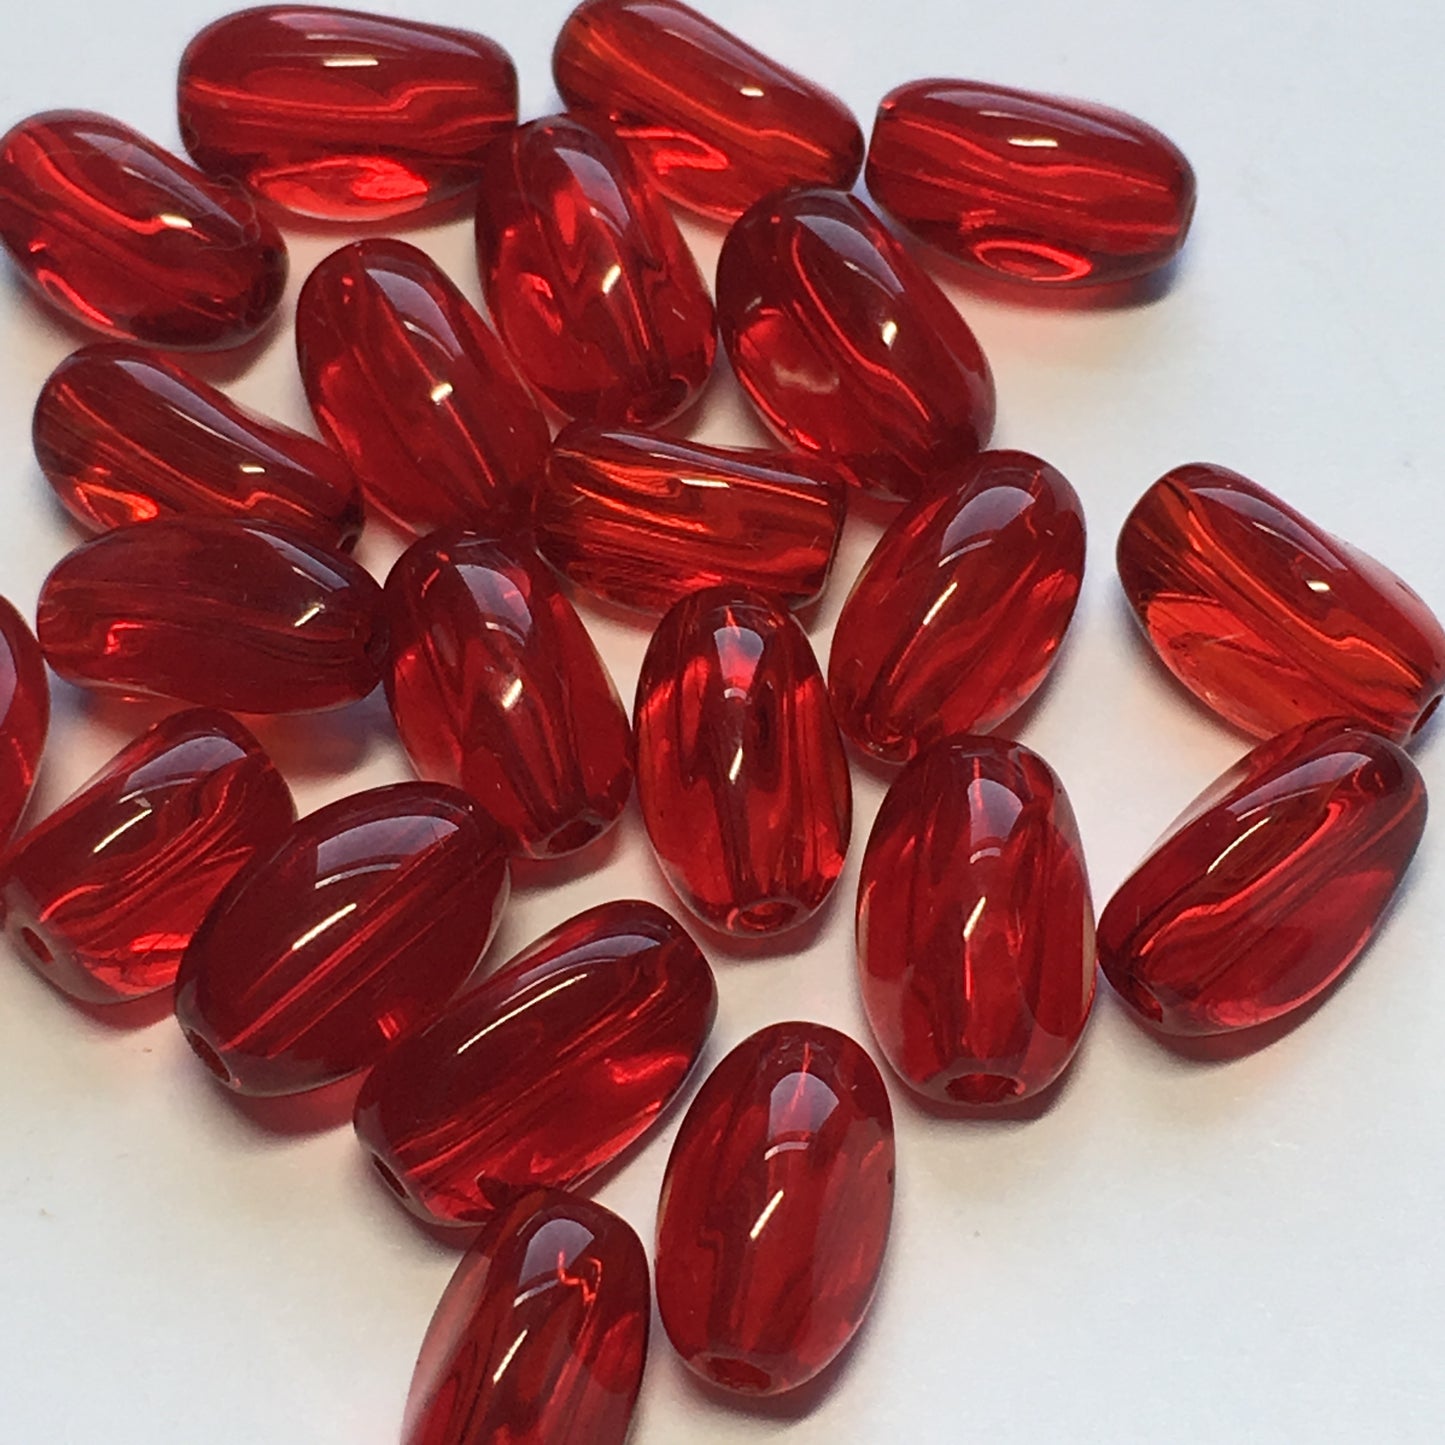 Transparent Ruby Red Glass Triangular Tube Beads 9 x 5.5 mm, 23 Beads